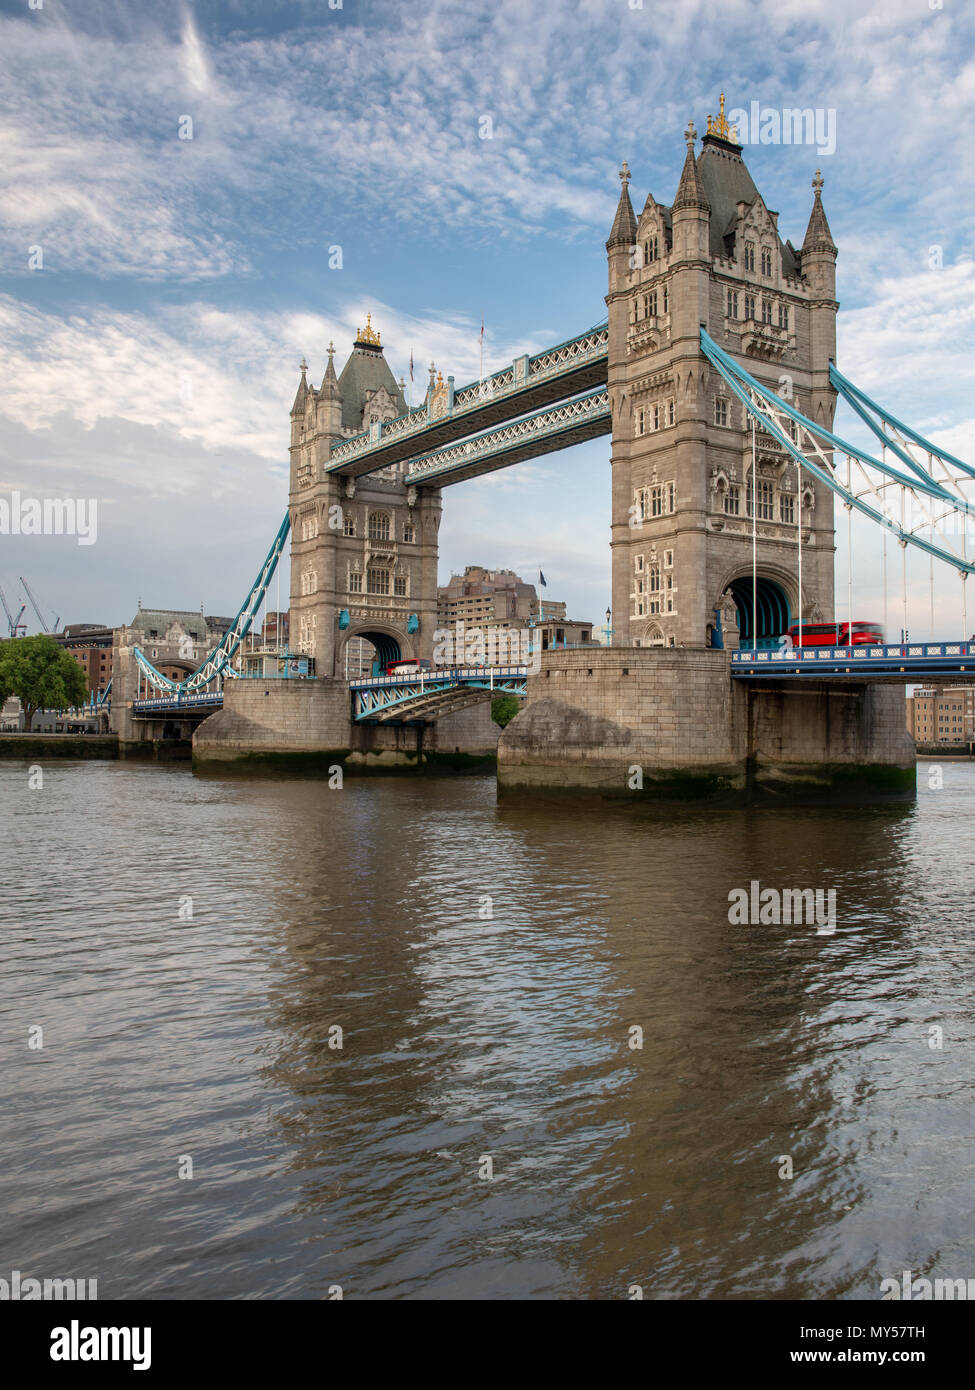 London, England, UK - June 1, 2018: A traditional red double-decker bus crosses London's Tower Bridge. Stock Photo